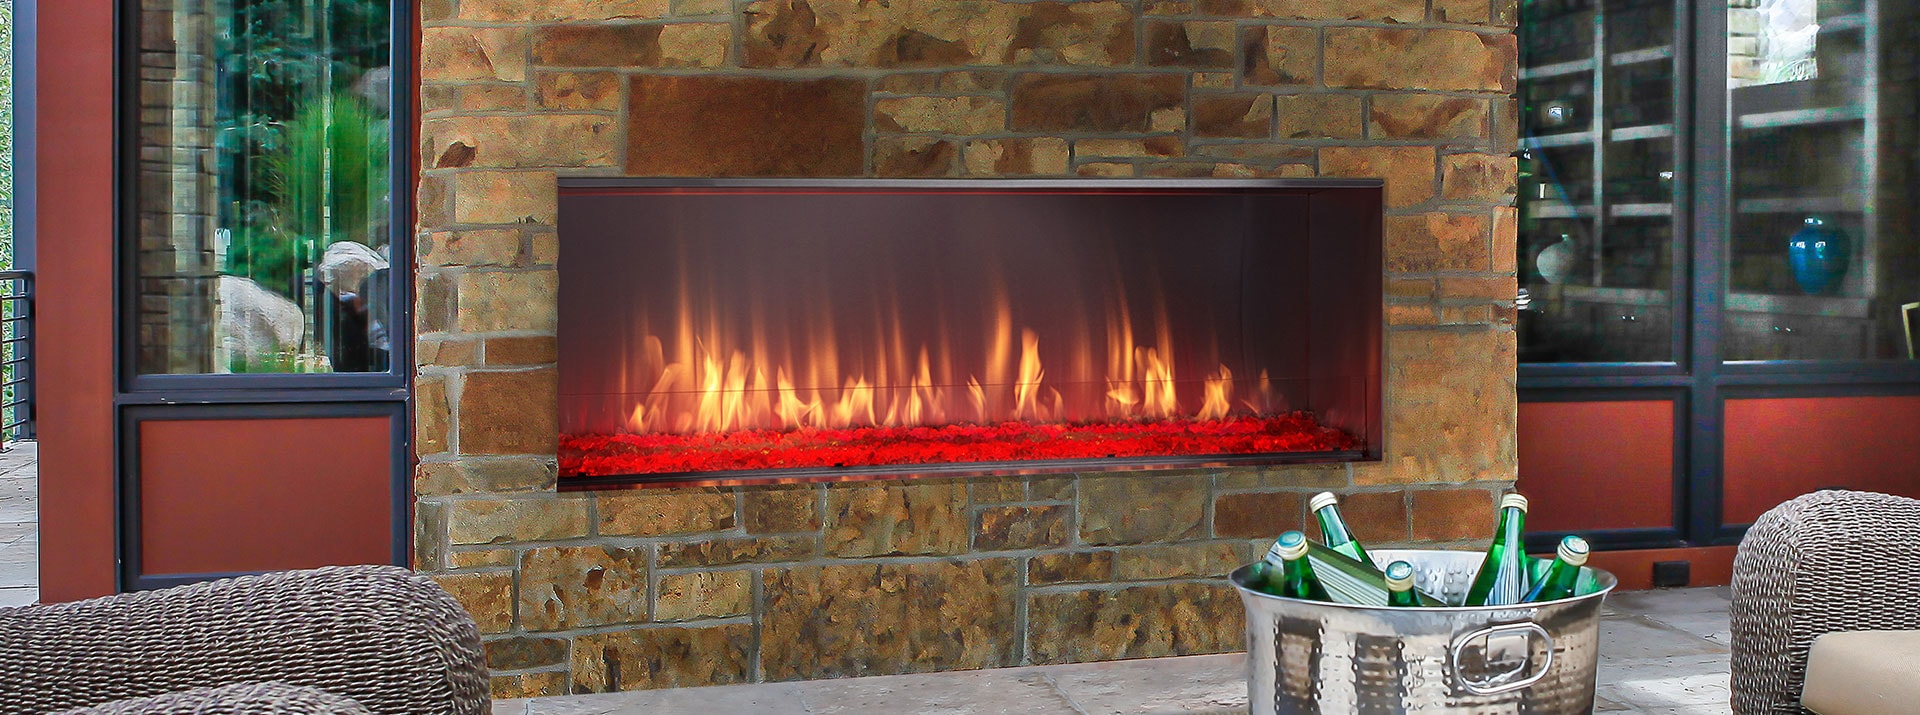 Fireplace Refractory Panels Home Depot Elegant Gas Fireboxes for Fireplaces Charming Fireplace